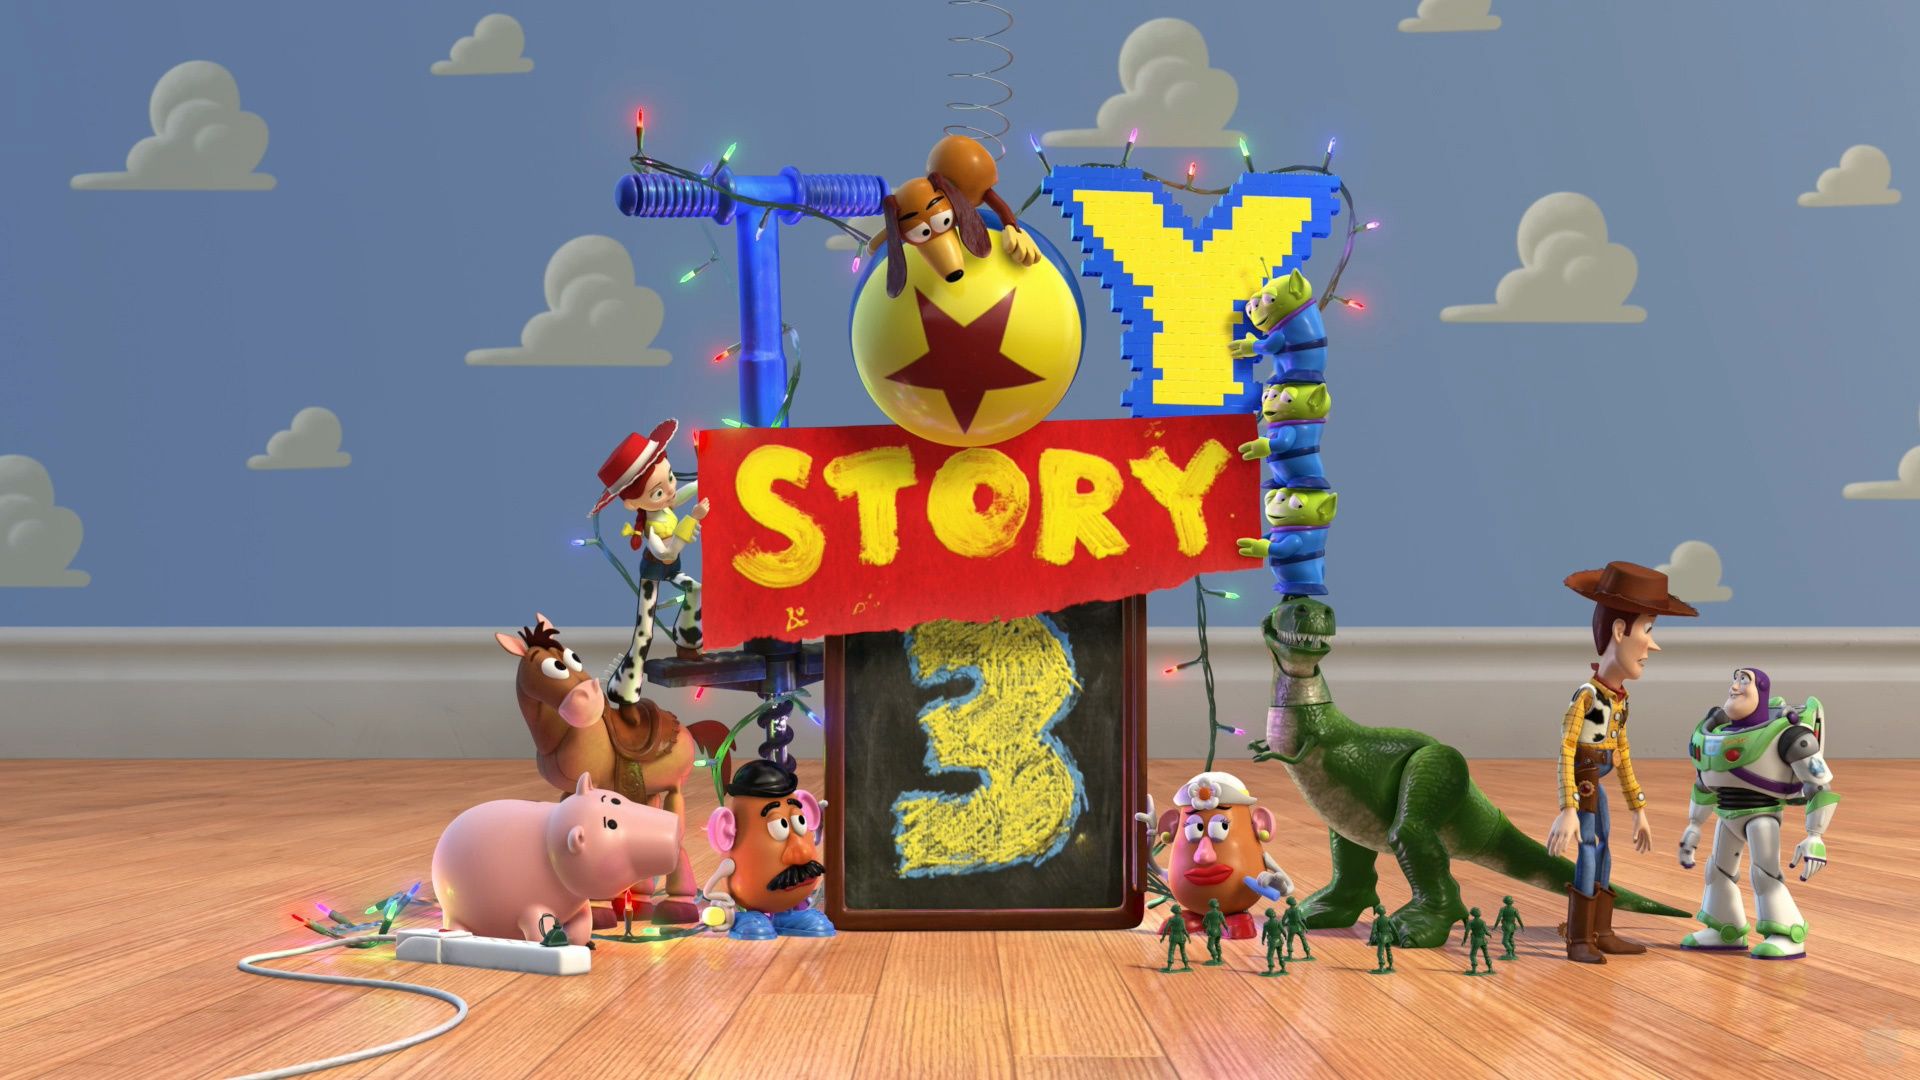 Toy story 3 wallpapers hd 1920x1080 logo 2